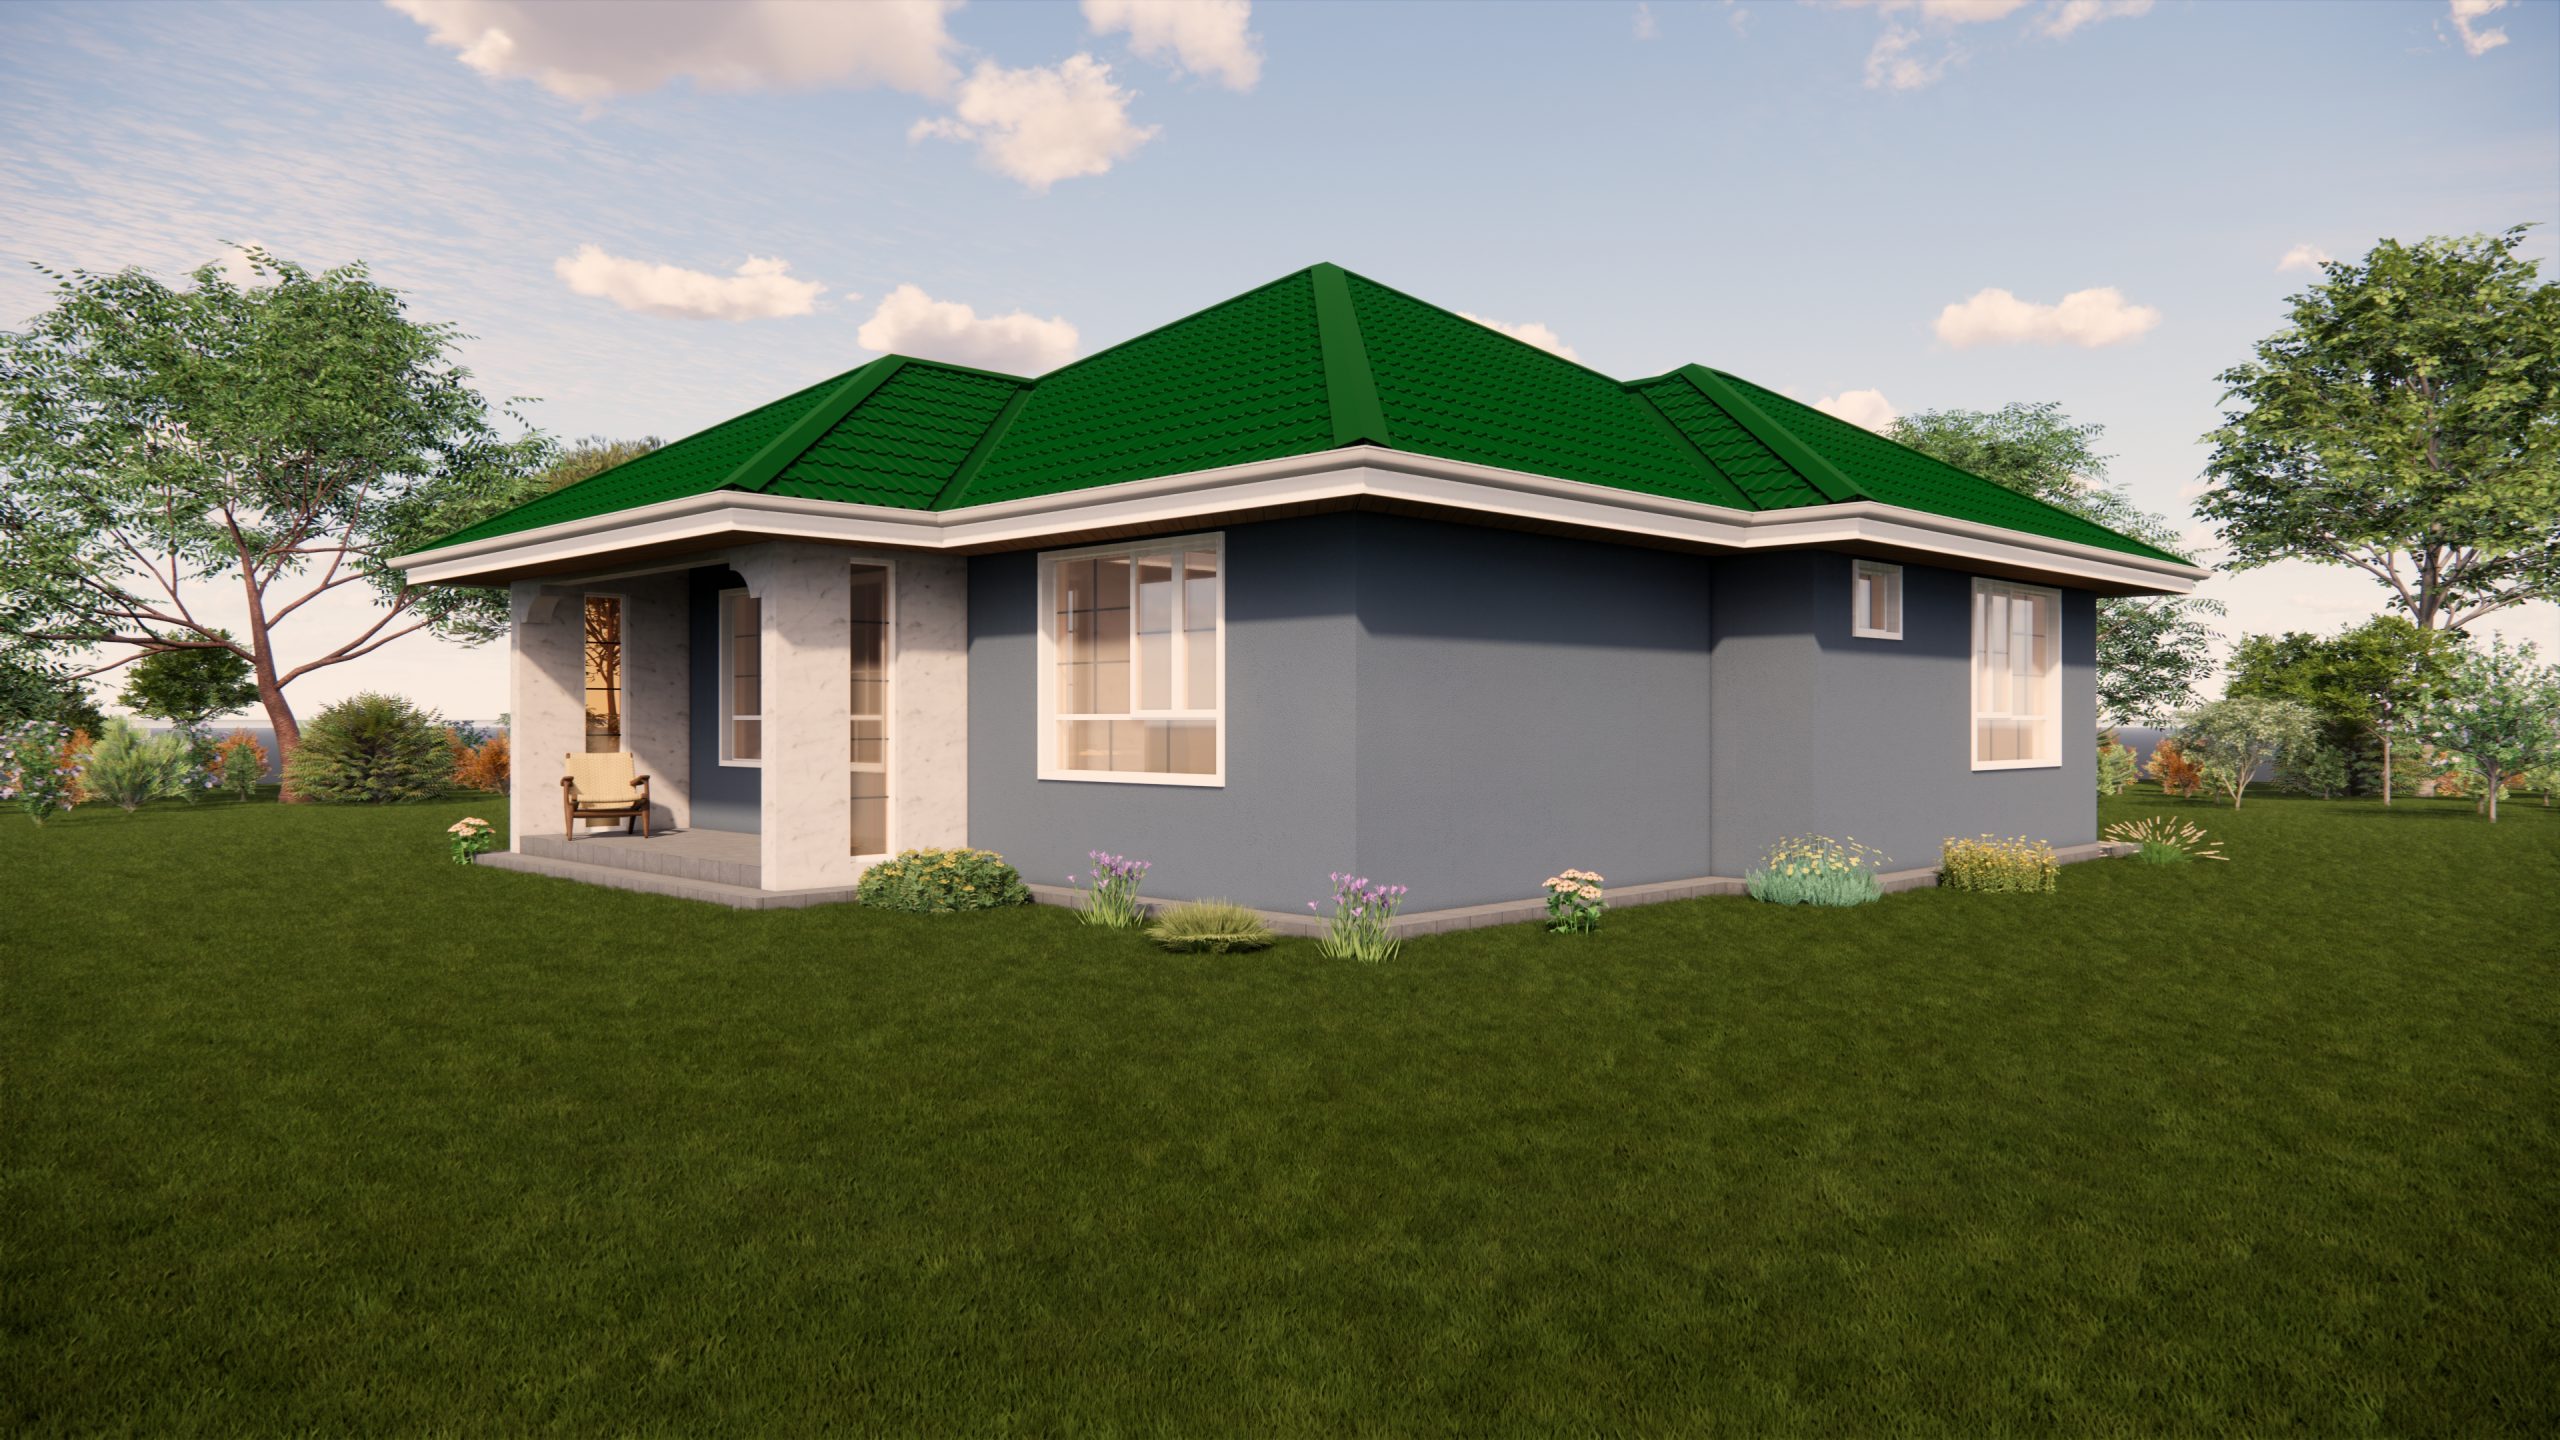 Simple Two Bedroom Bungalow House Plan